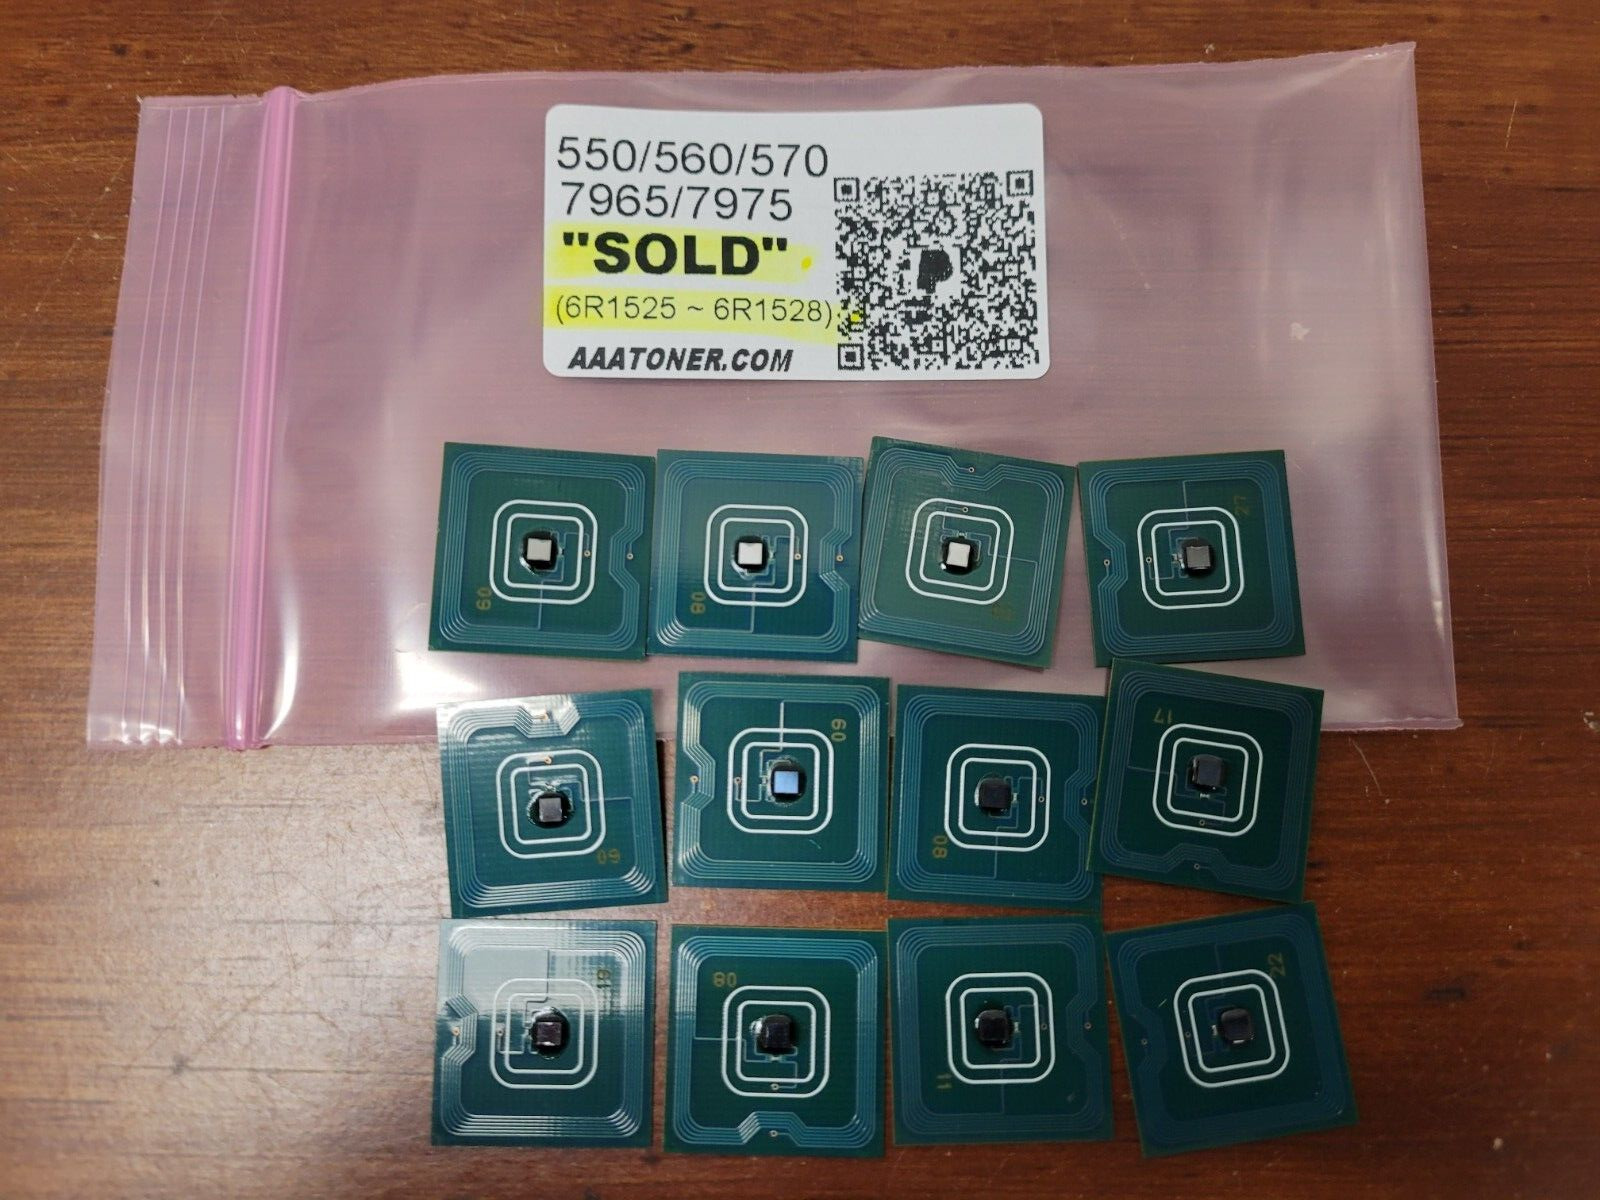 12 x Toner Chip (1525 - SOLD) for Xerox 550, 560, 570 WC 7965, 7975 Refill